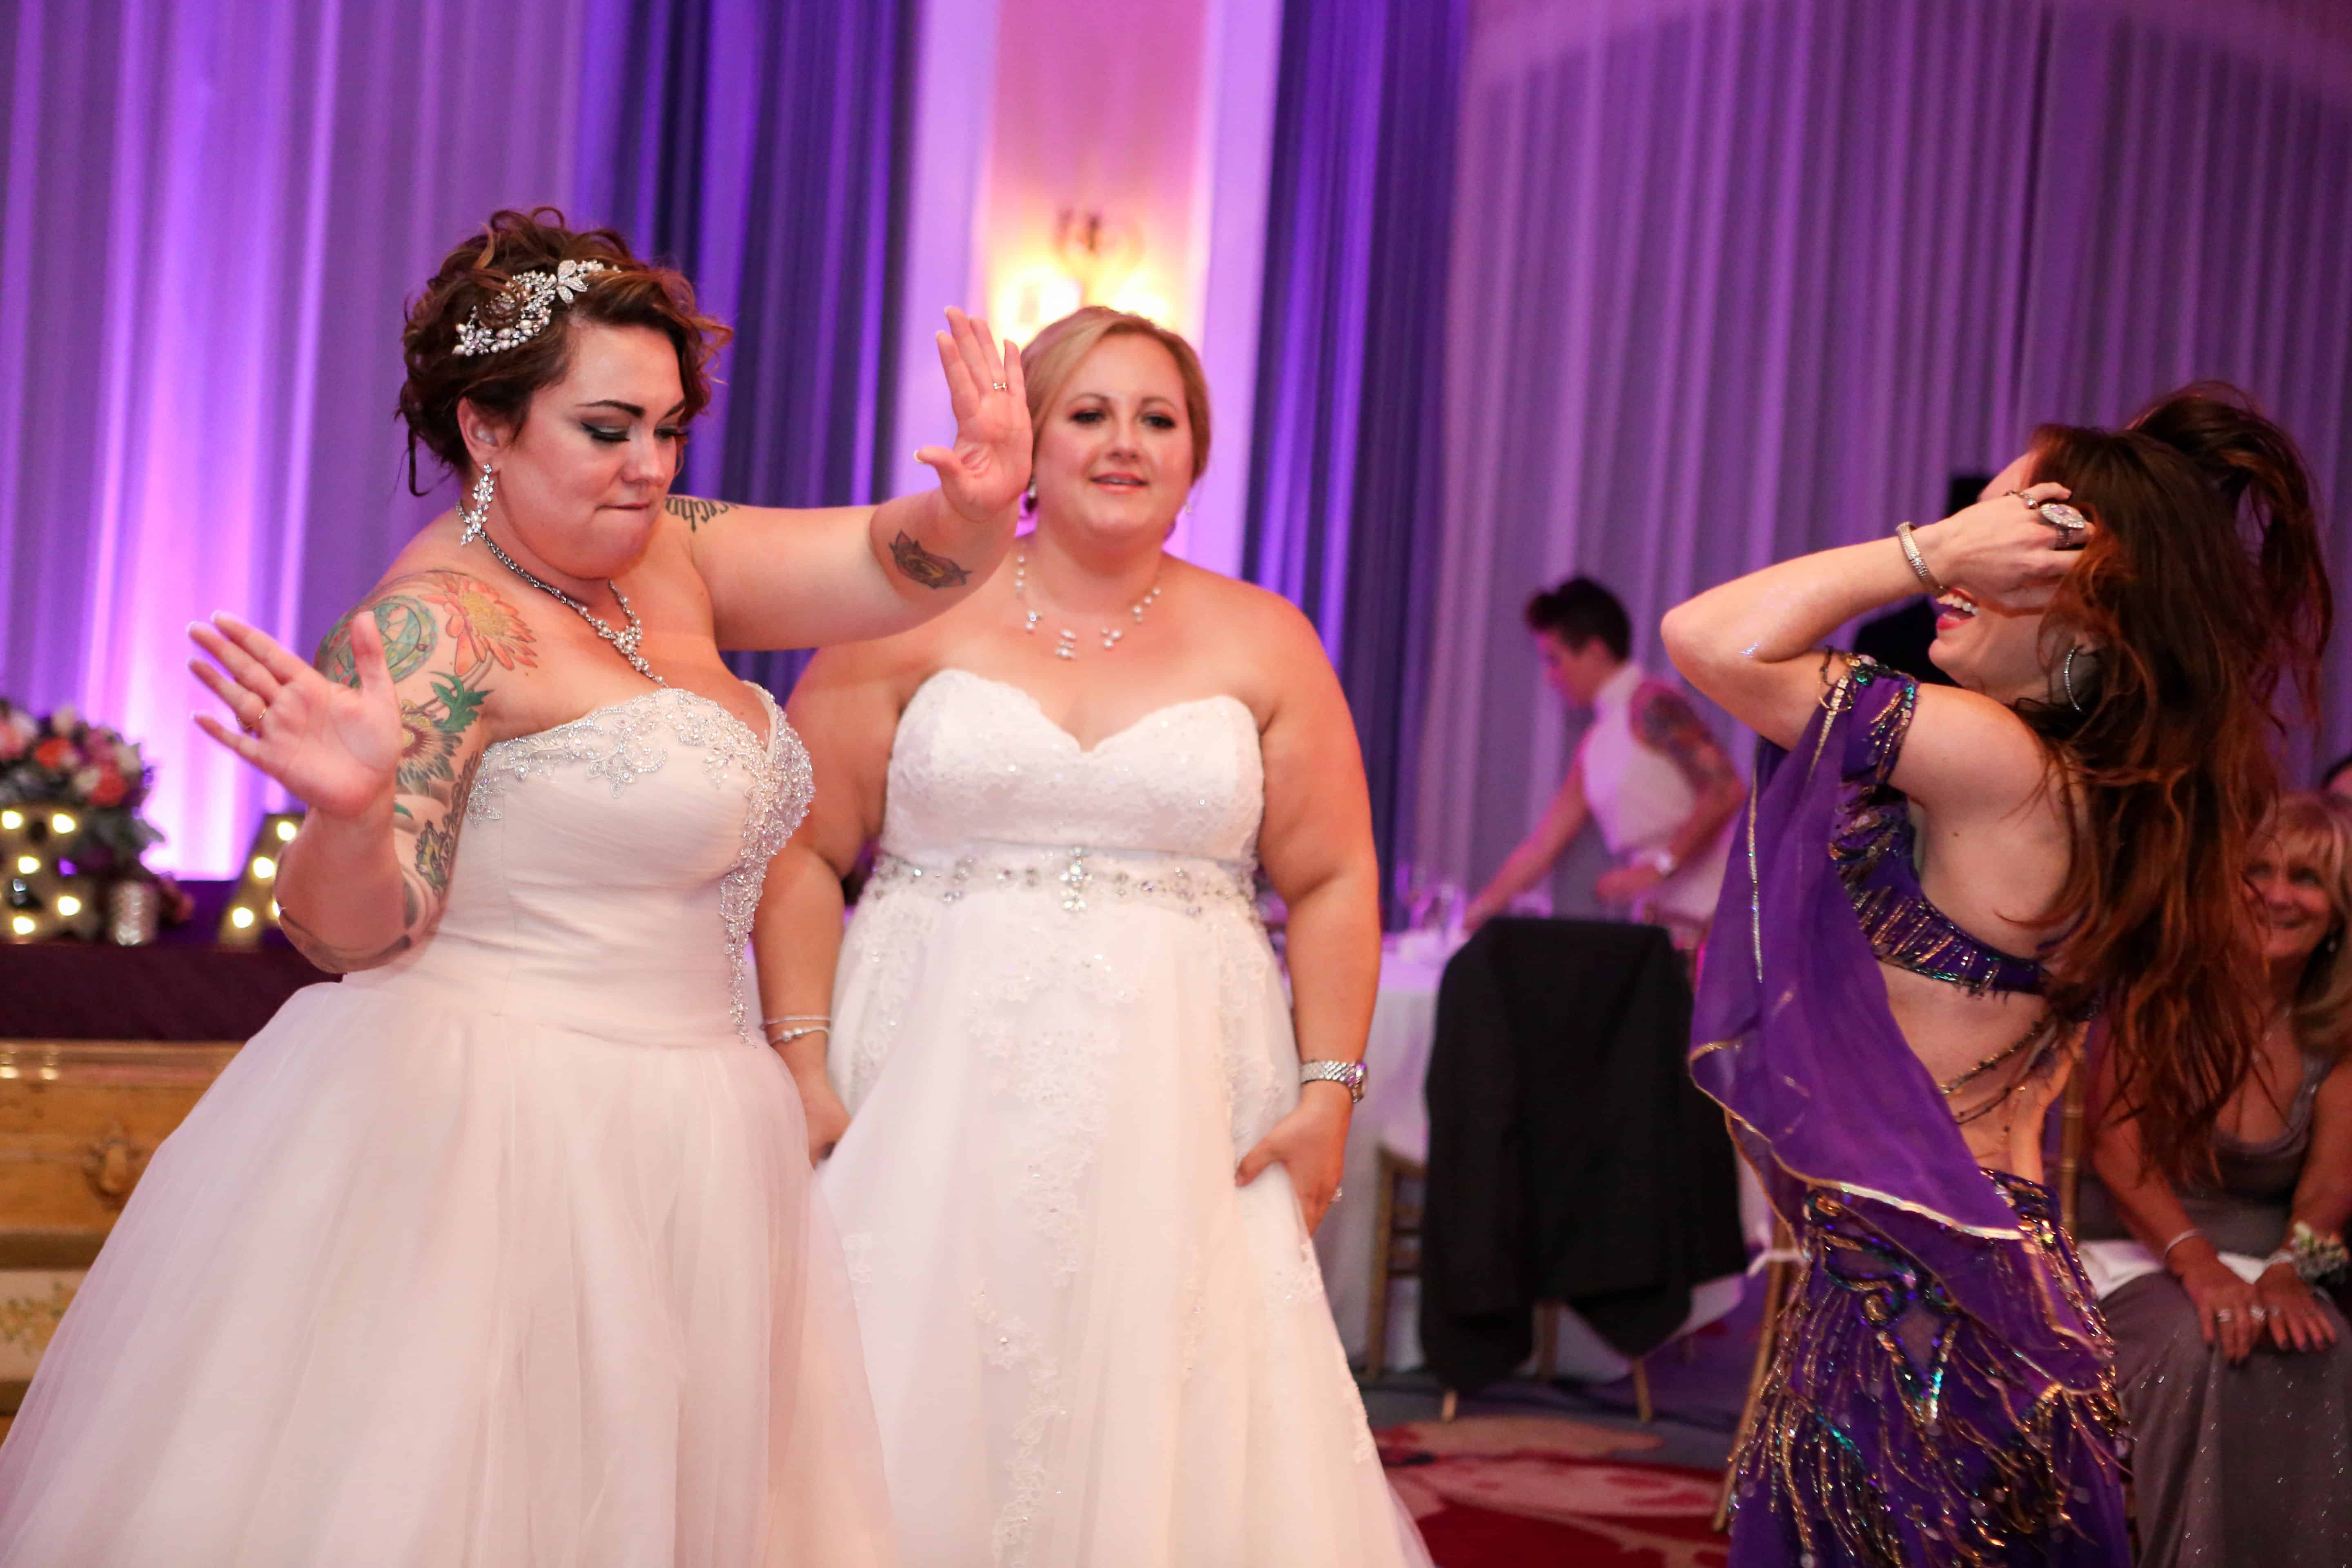 Carrara performs belly dance at an LGBT wedding at Omni Championsgate. Photo by LiveHappy Studio